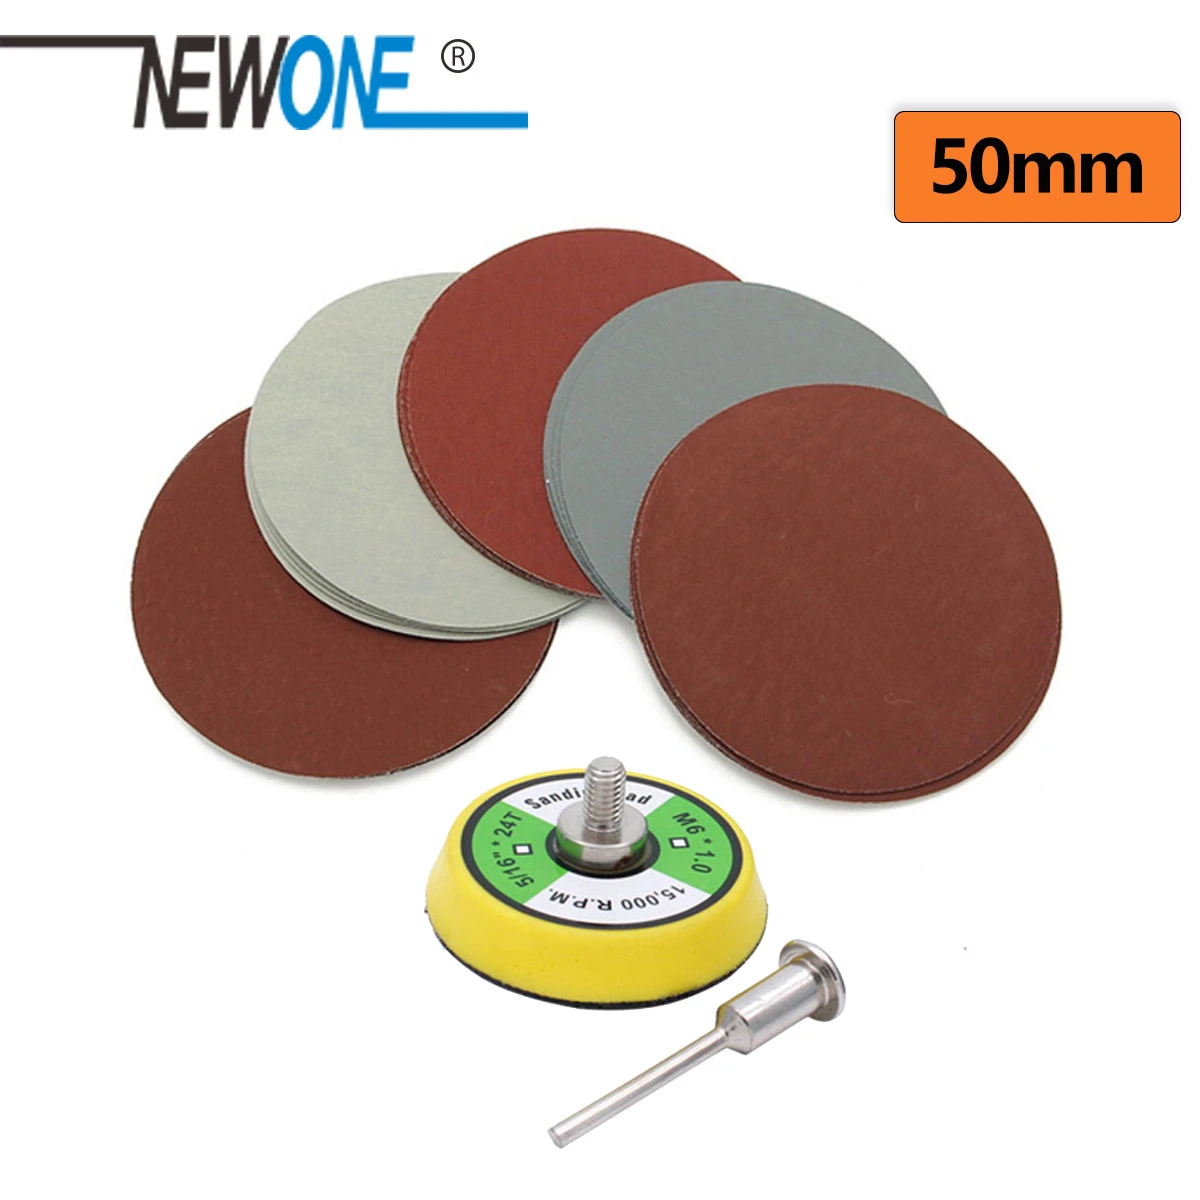 100pcs 2 inch 50mm Mix Sanding Sandpaper in Abrasive tool with 3mm Shank sanding Back-up Pad